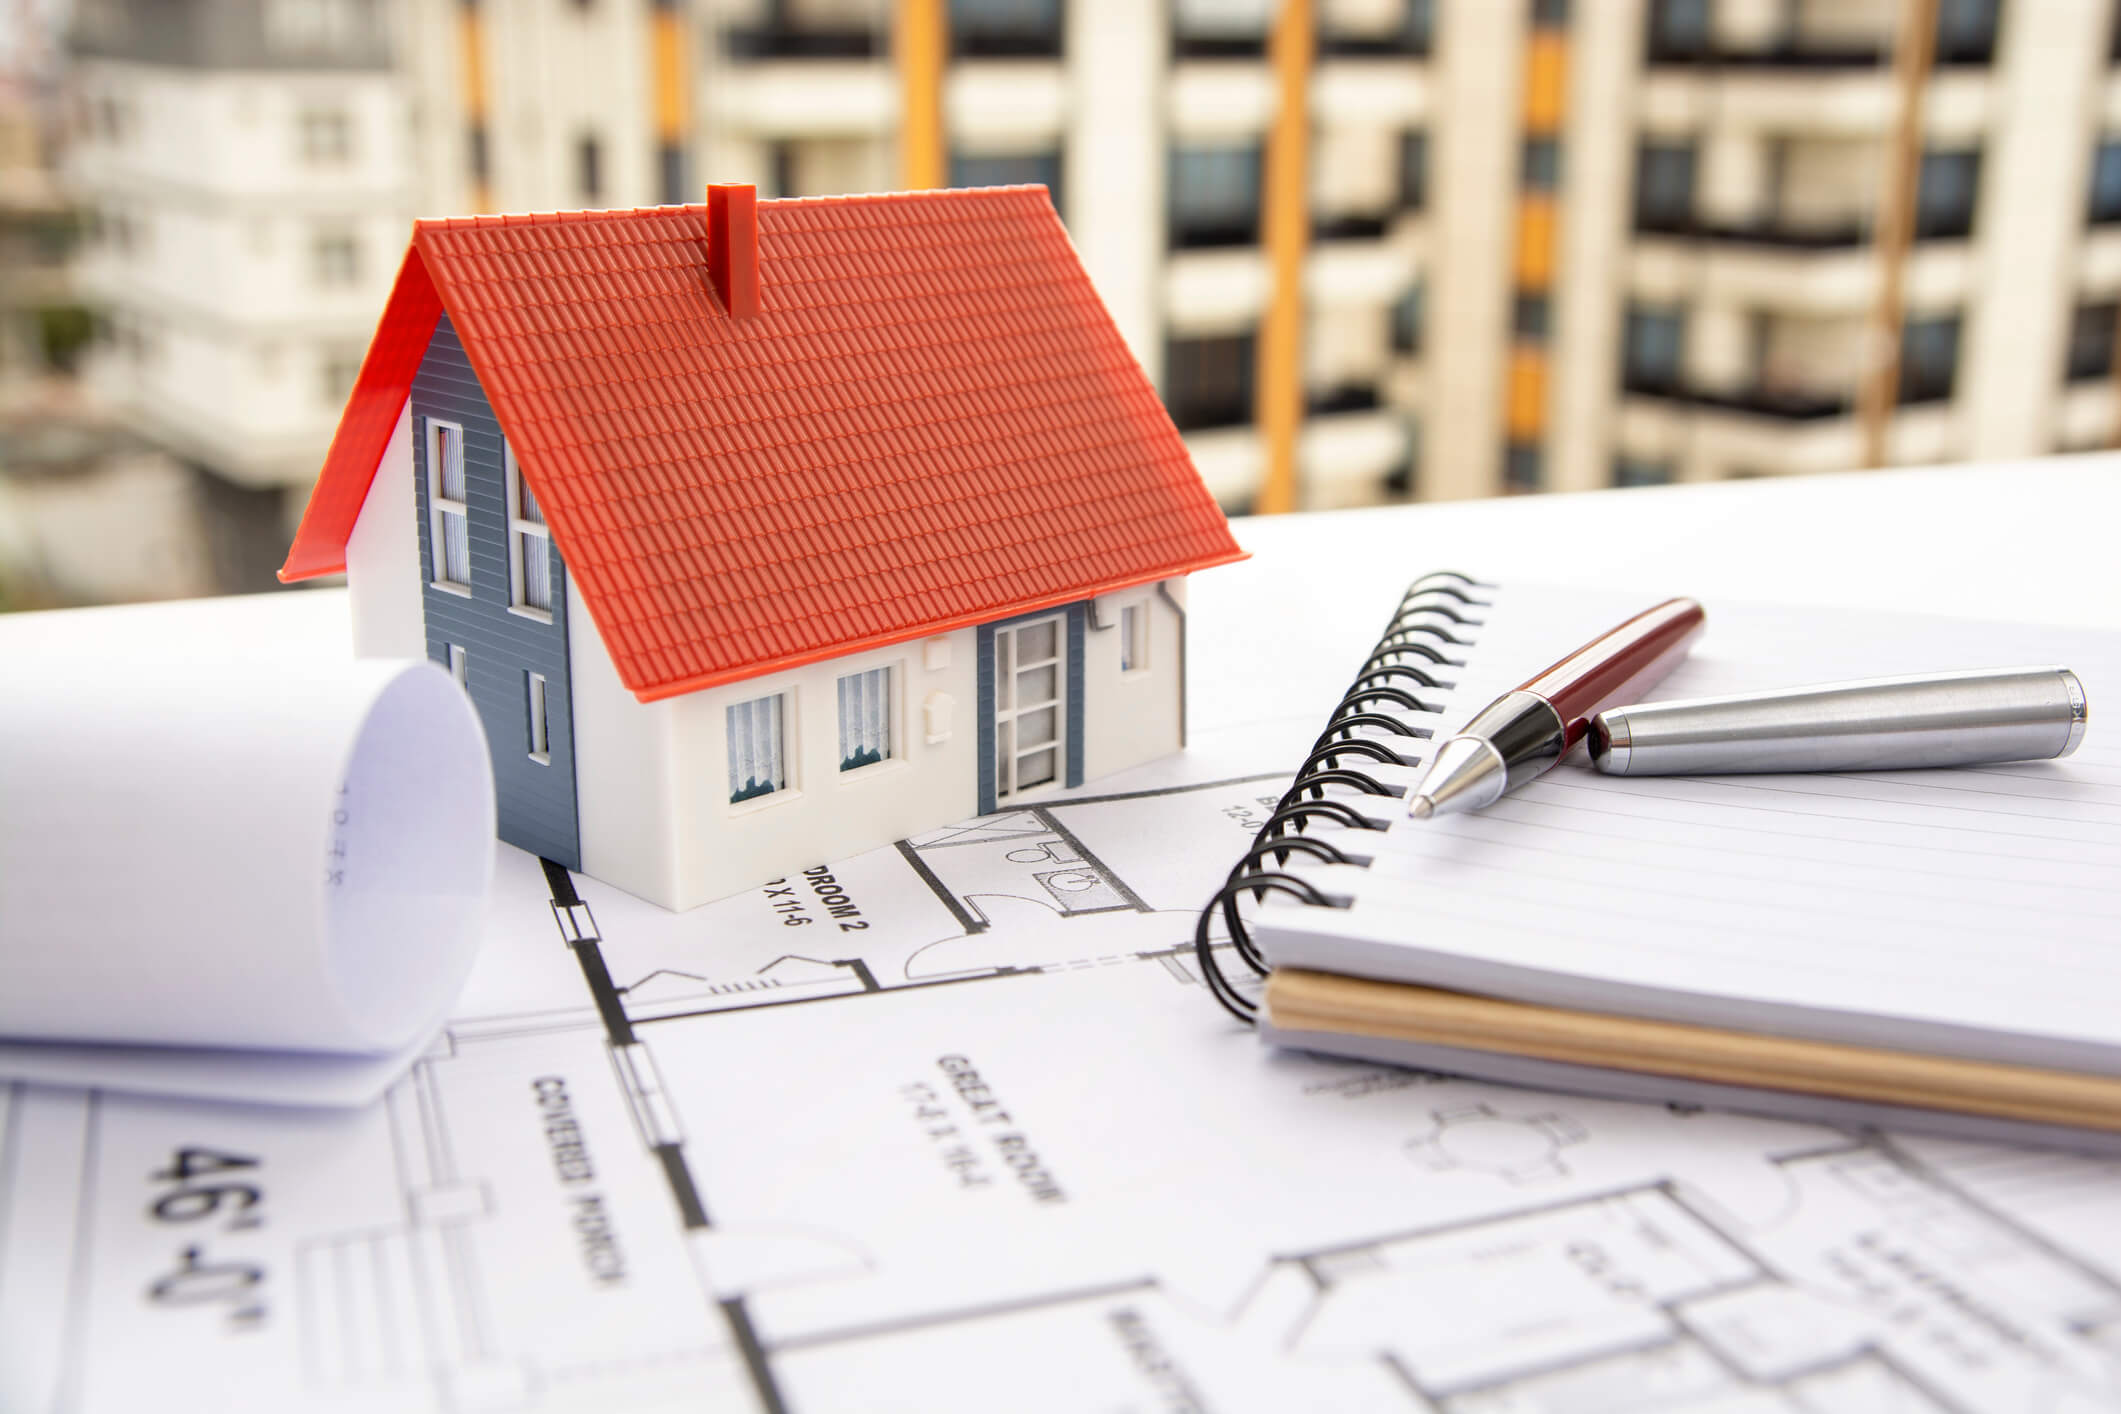 What Skills Do You Need to Be a Property Developer?